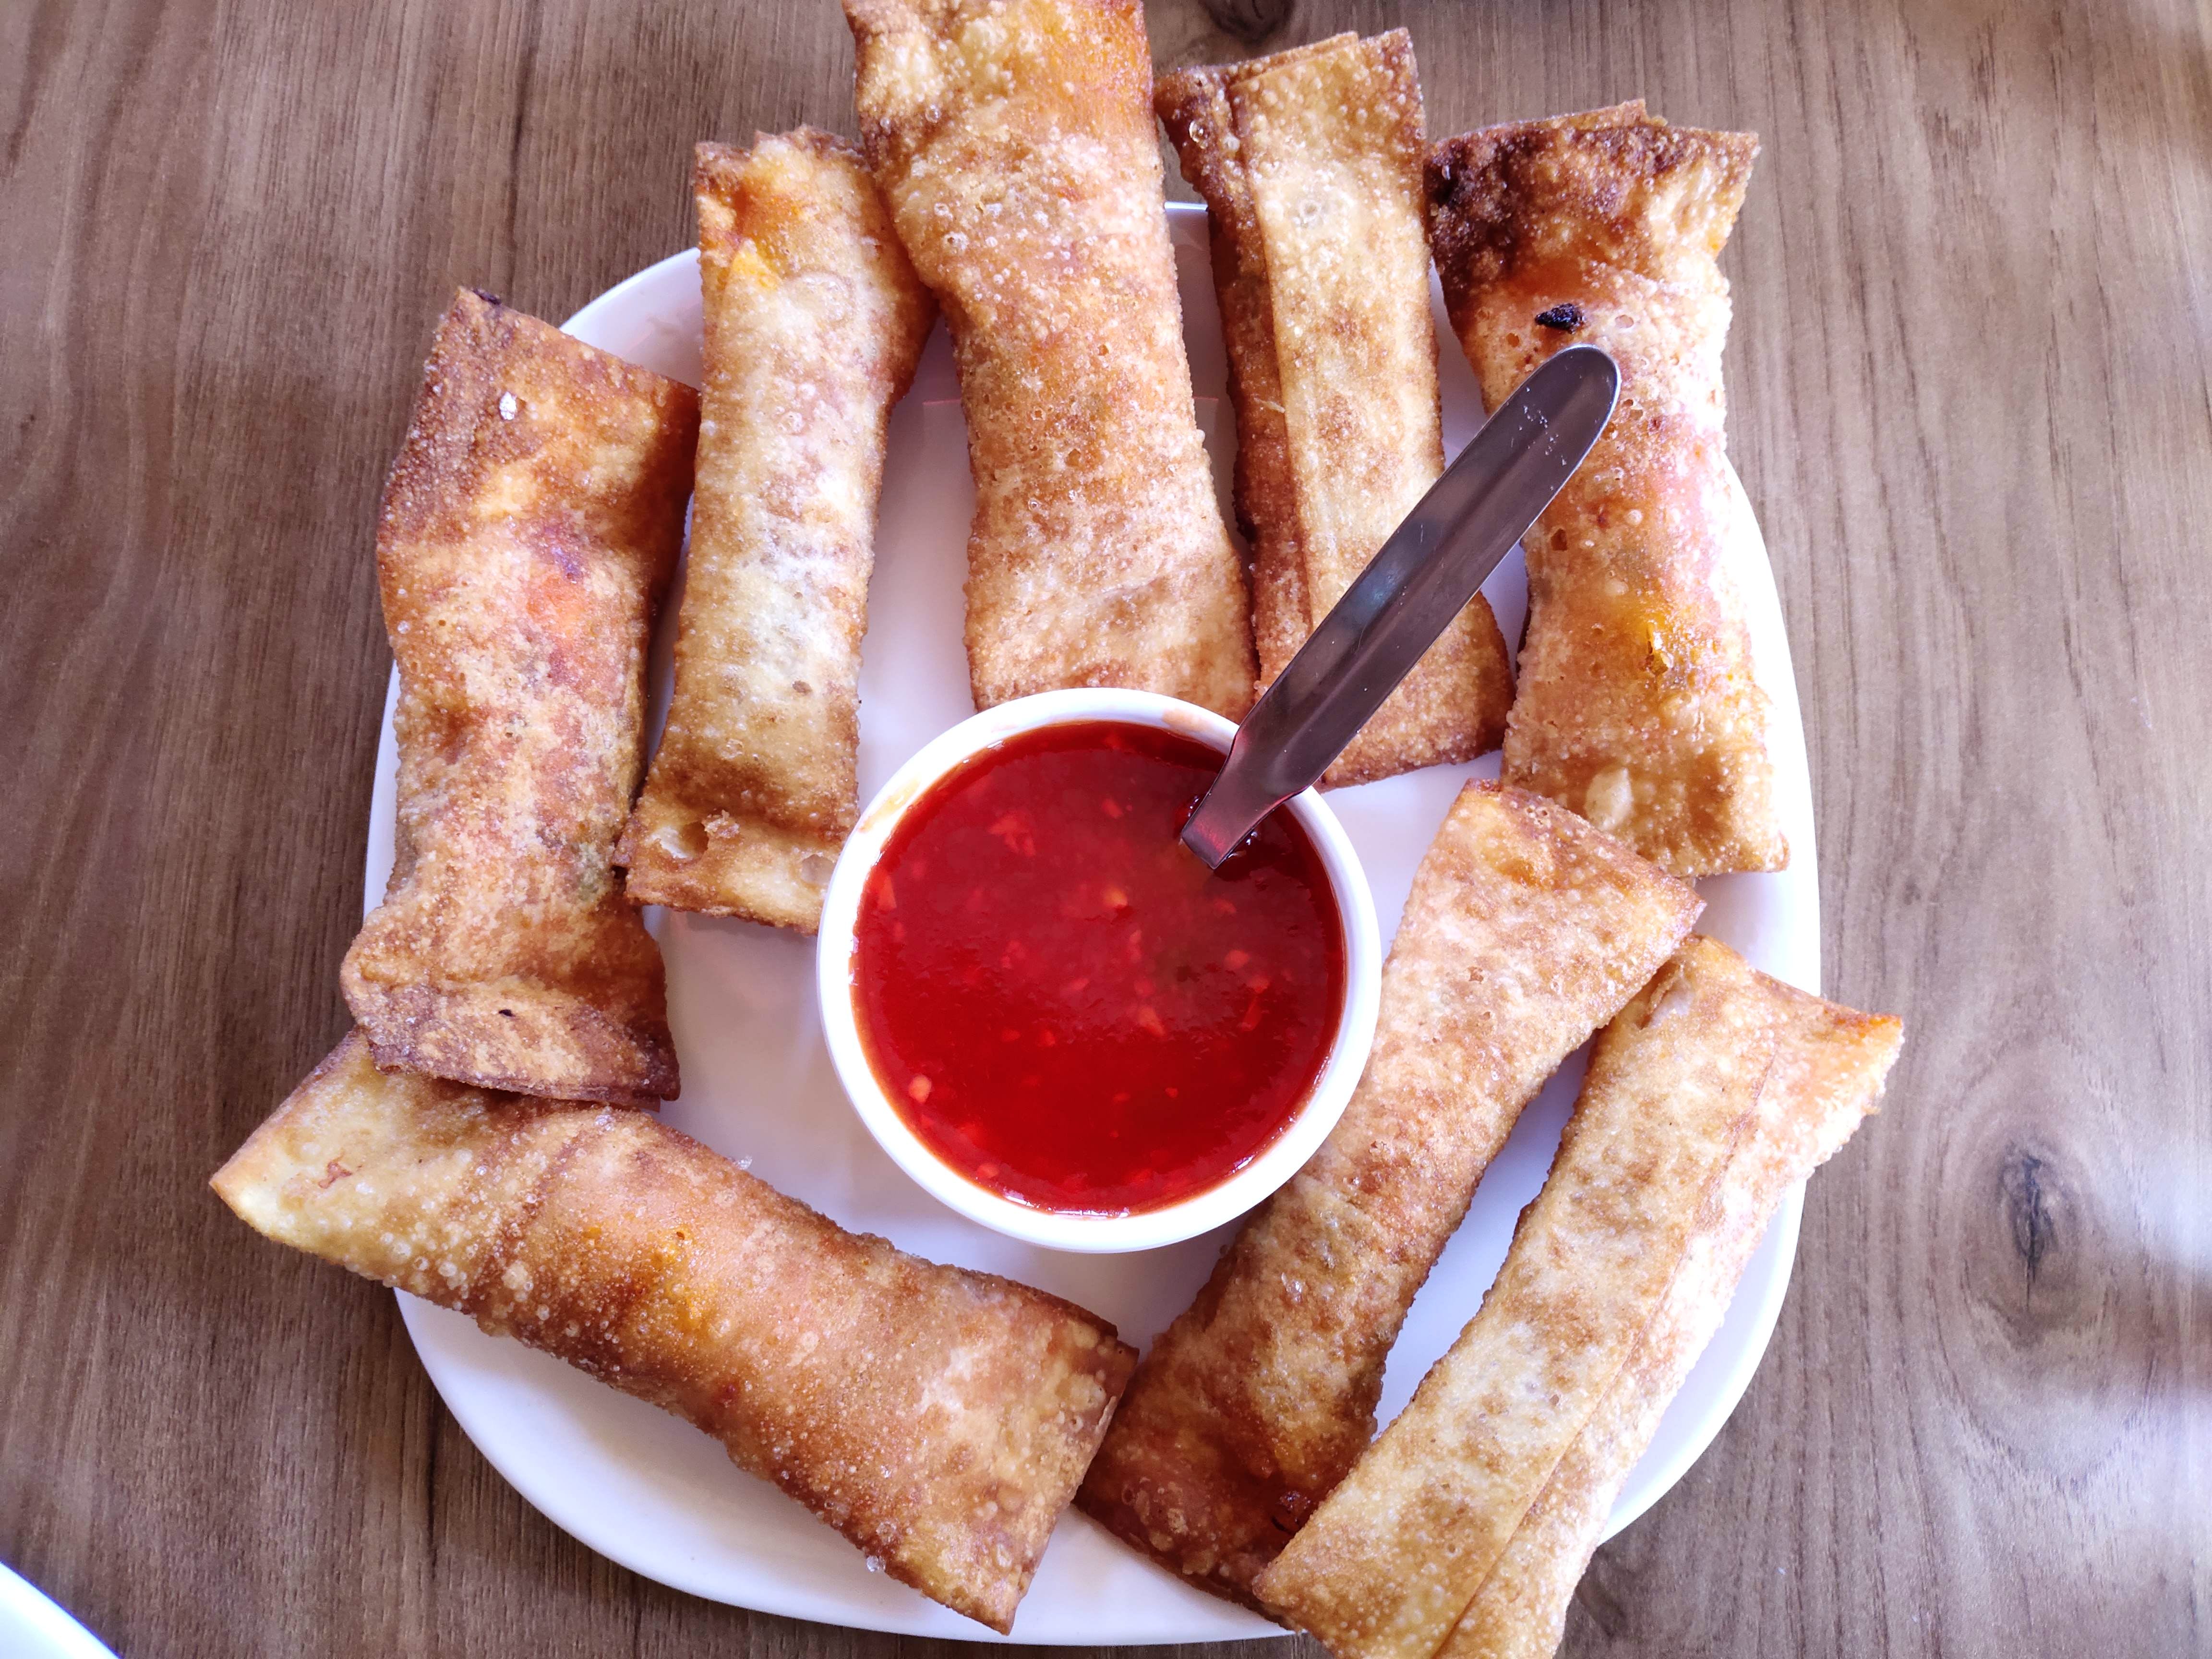 Dish,Food,Cuisine,Lumpia,Ingredient,Egg roll,Spring roll,appetizer,Fried food,Produce